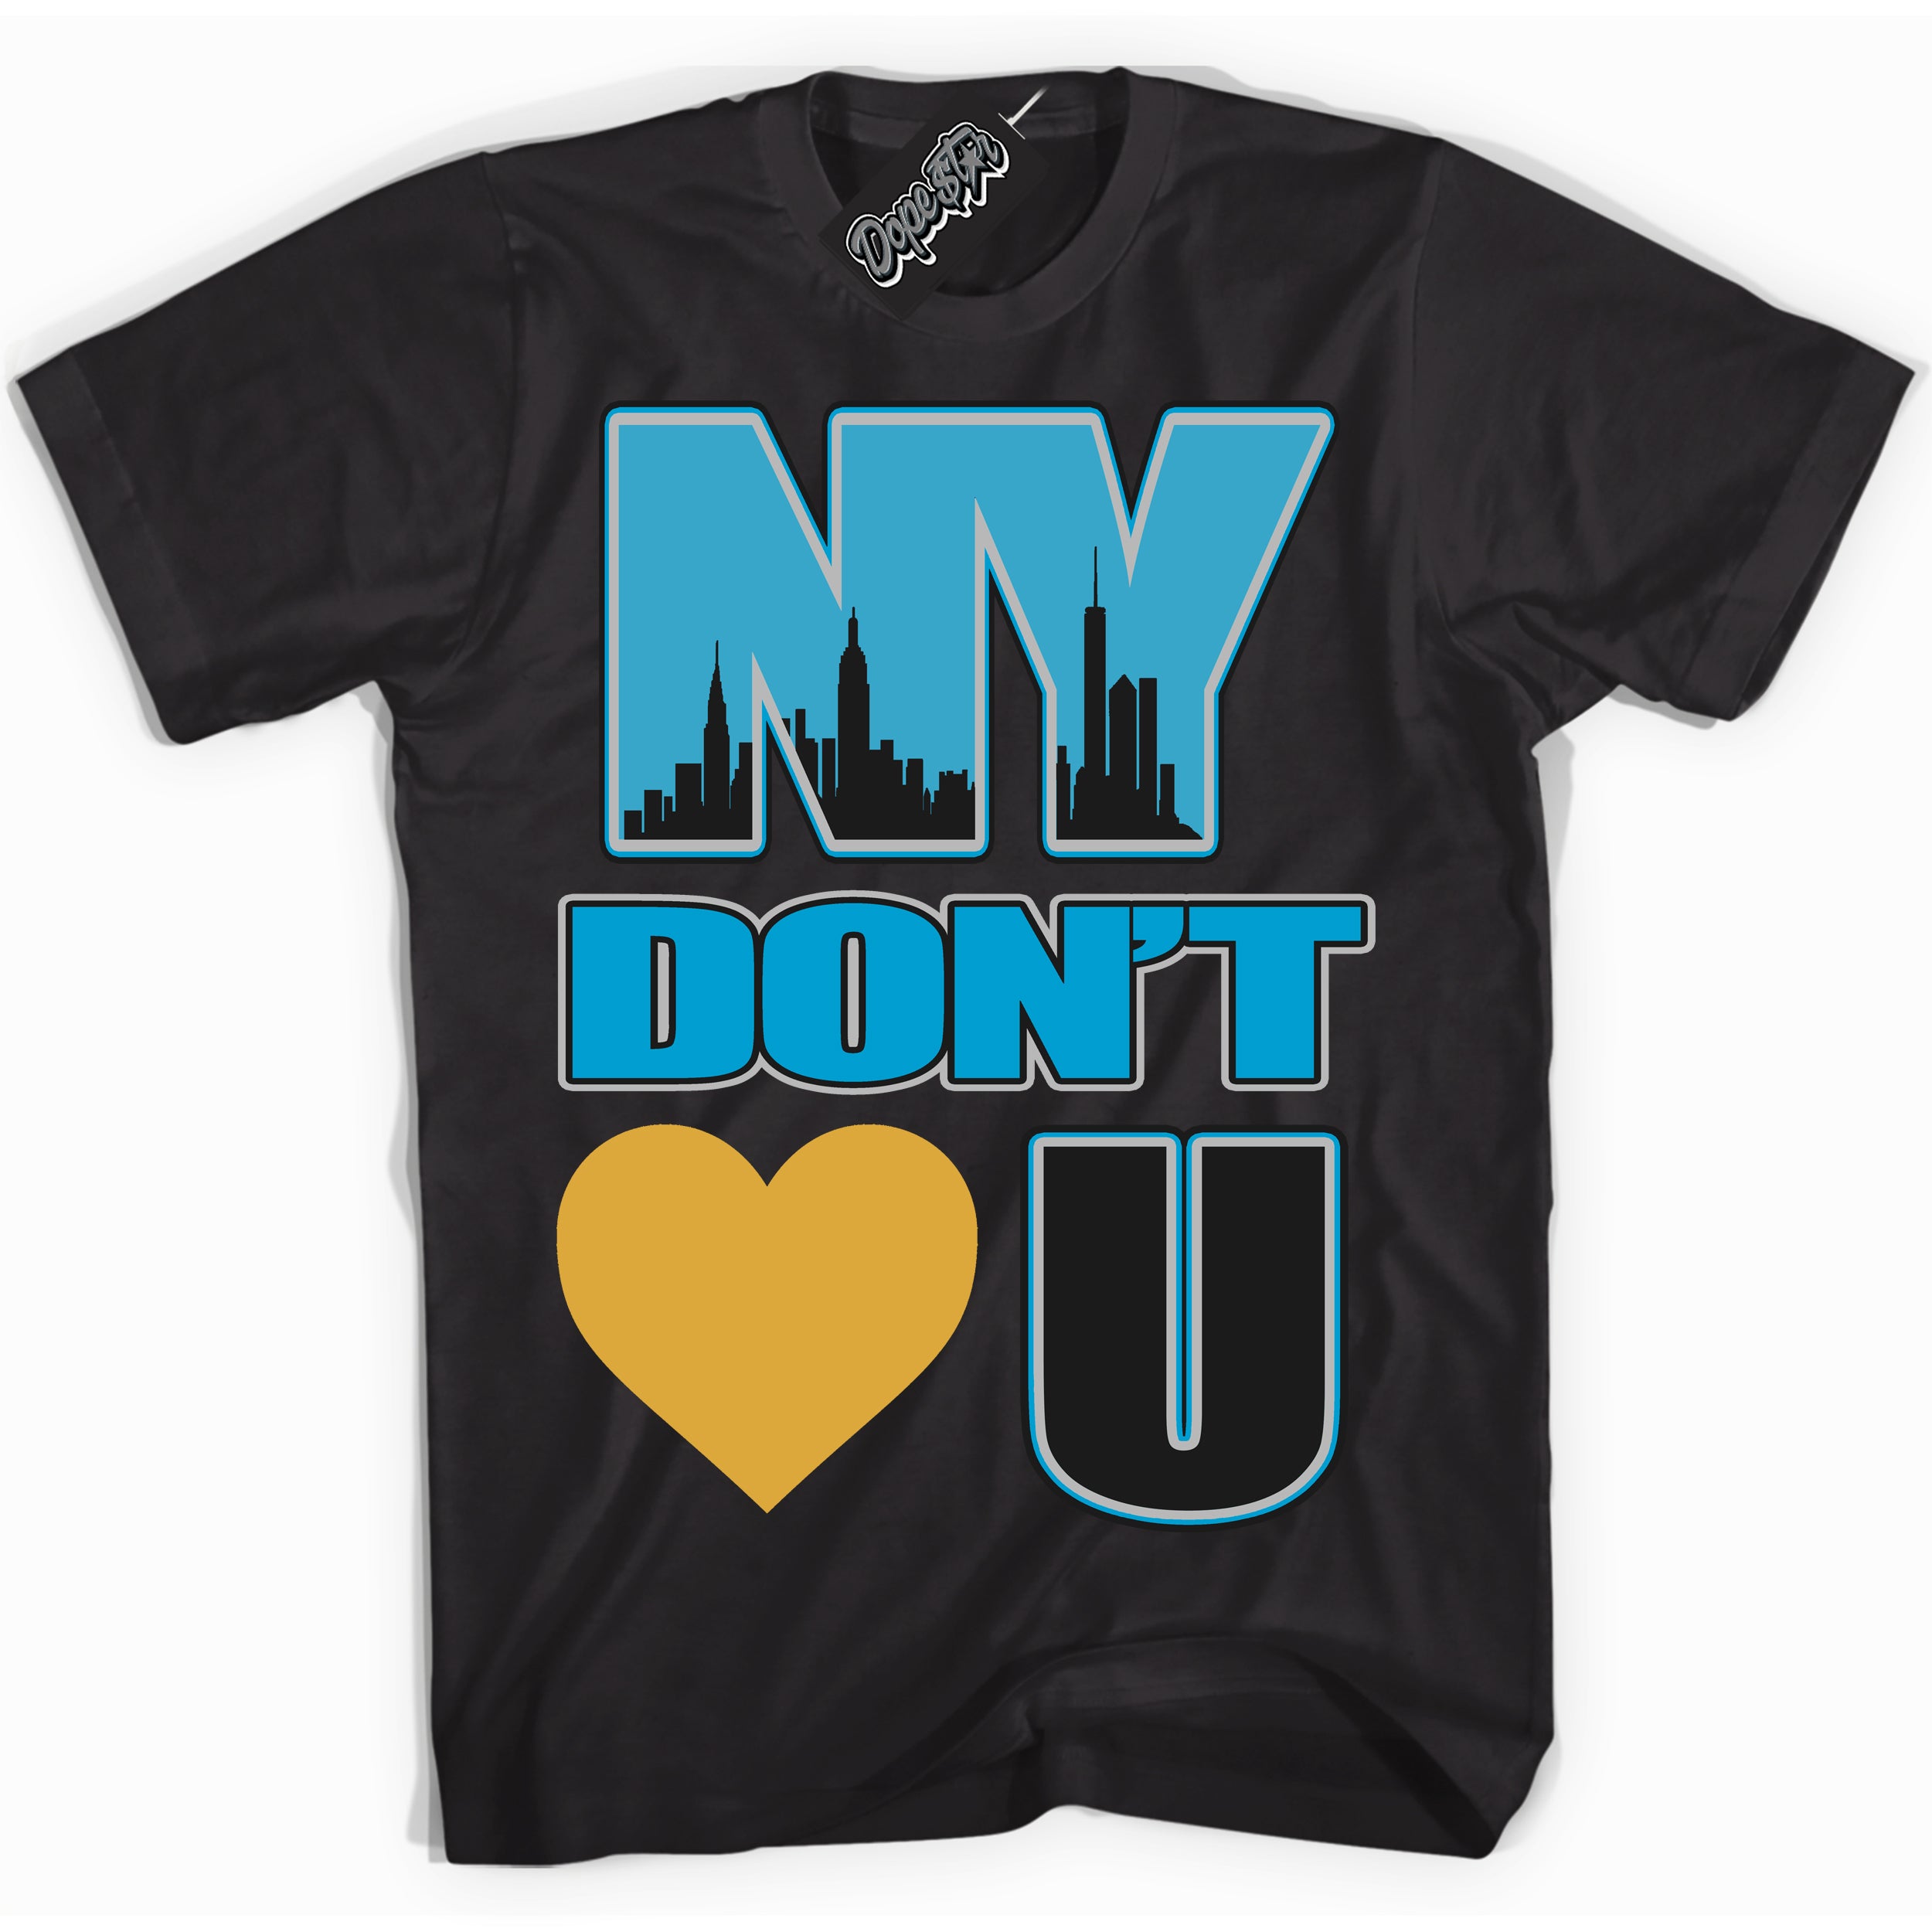 Cool Black Shirt with “ NY Don't Love You” design that perfectly matches Aqua 5s Sneakers.